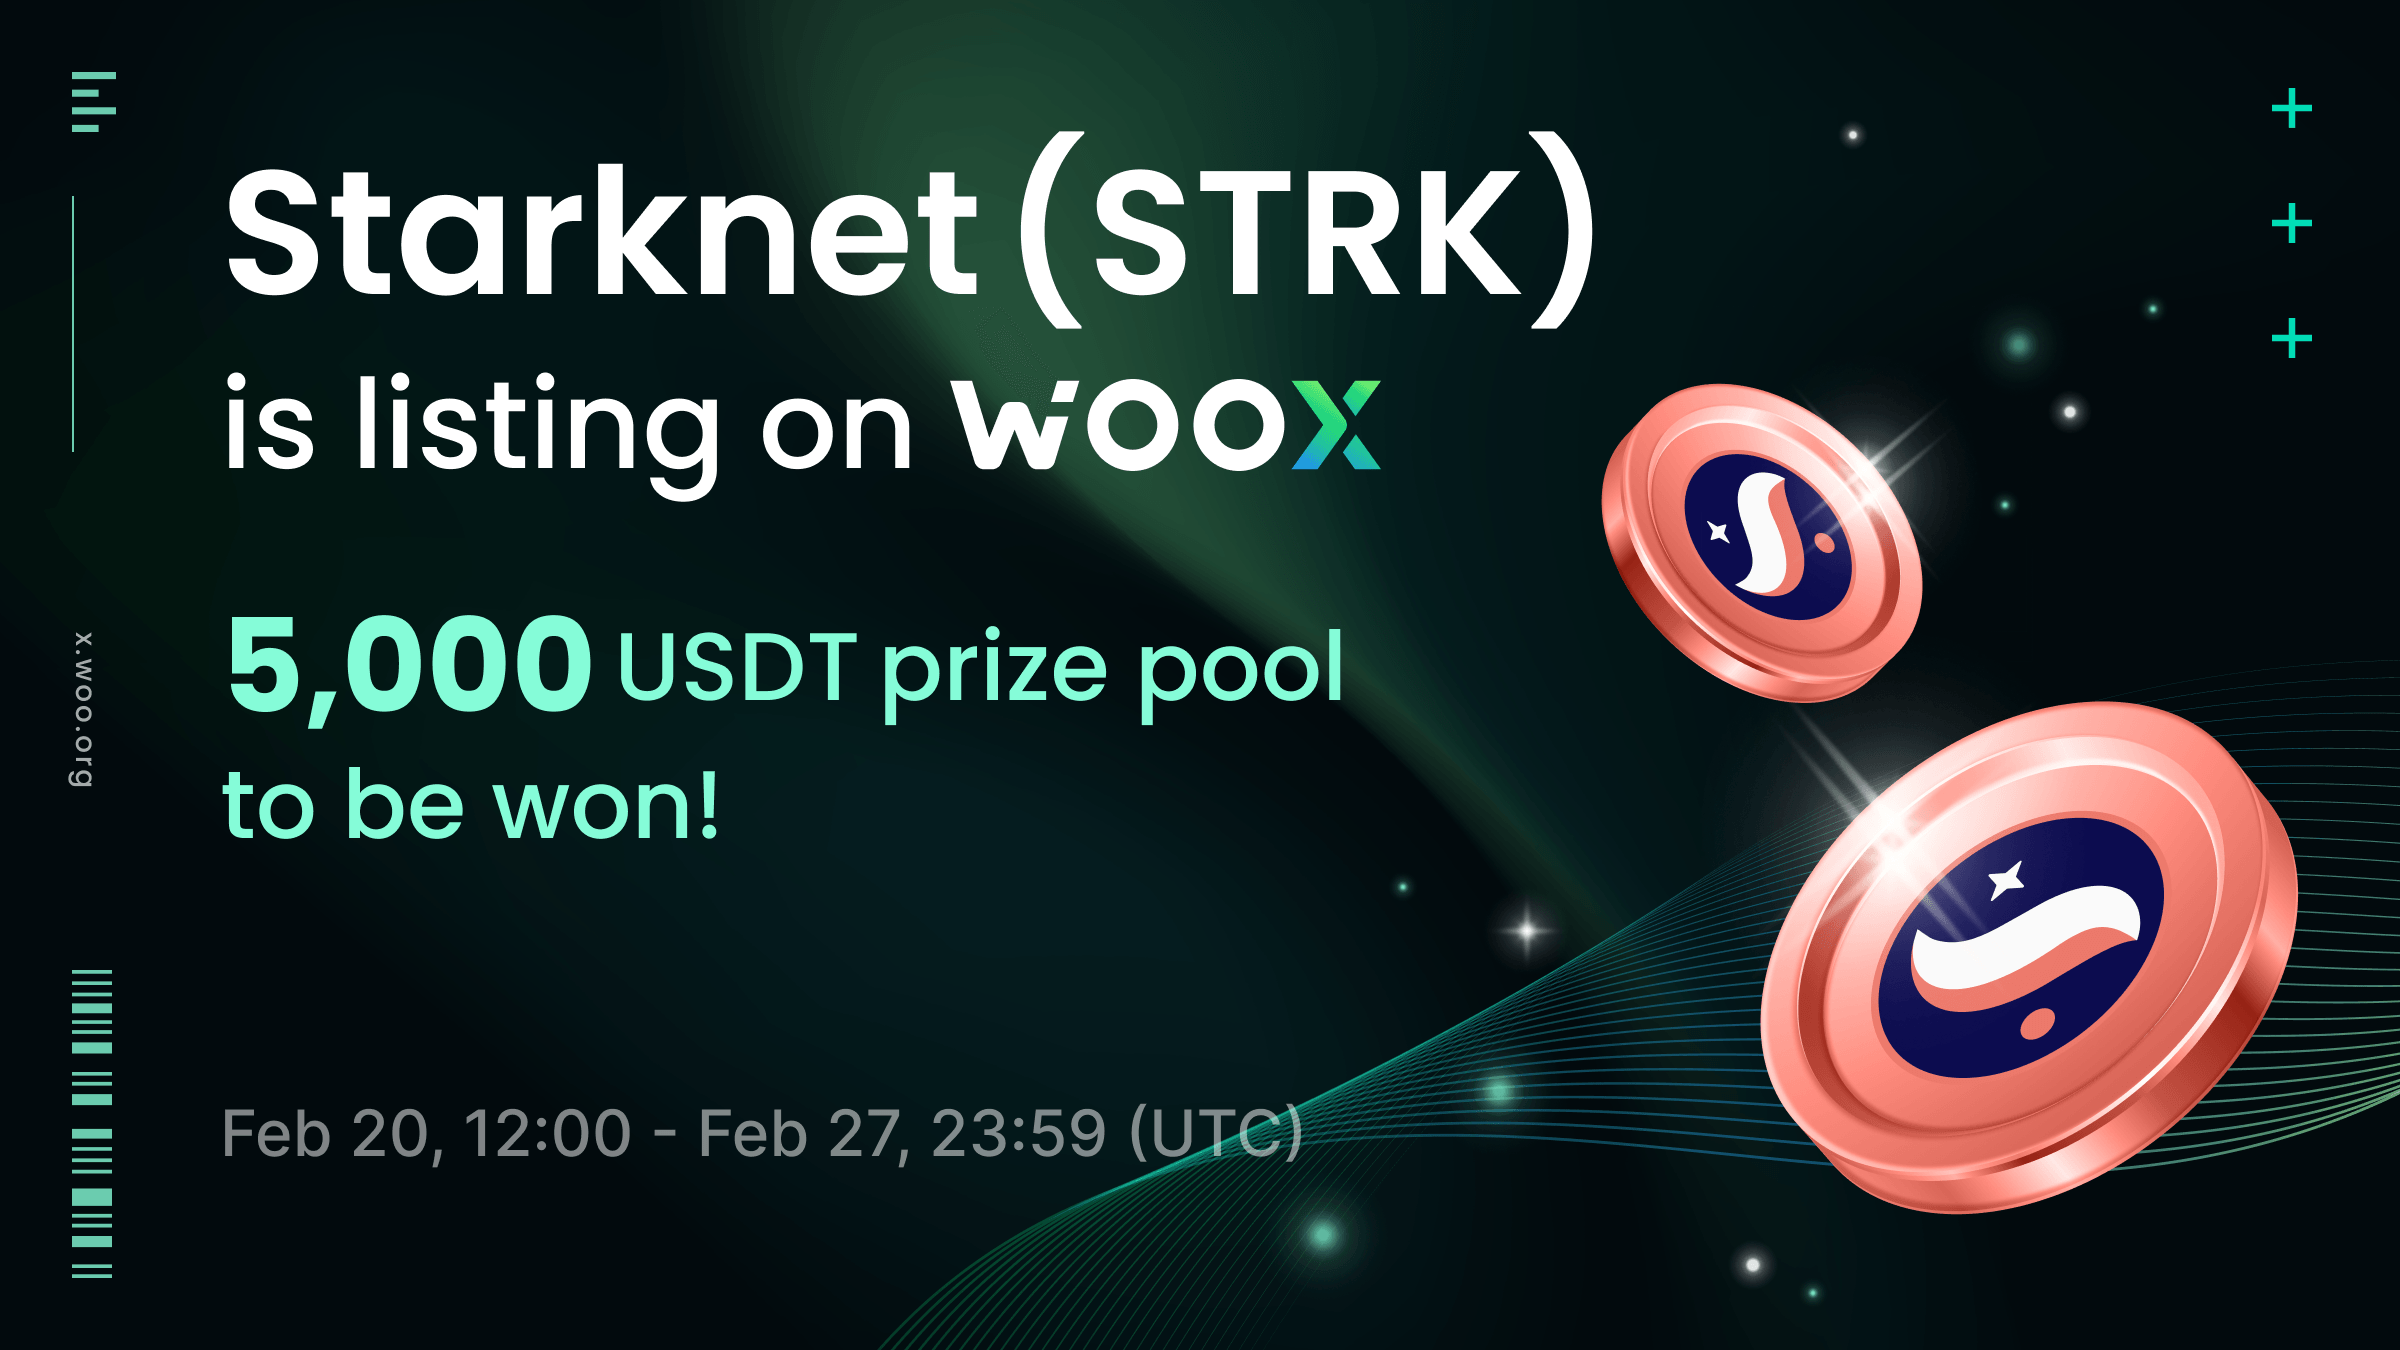 New Listing: Starknet (STRK) on WOO X - Trade and share a 5,000 USDT prize pool!